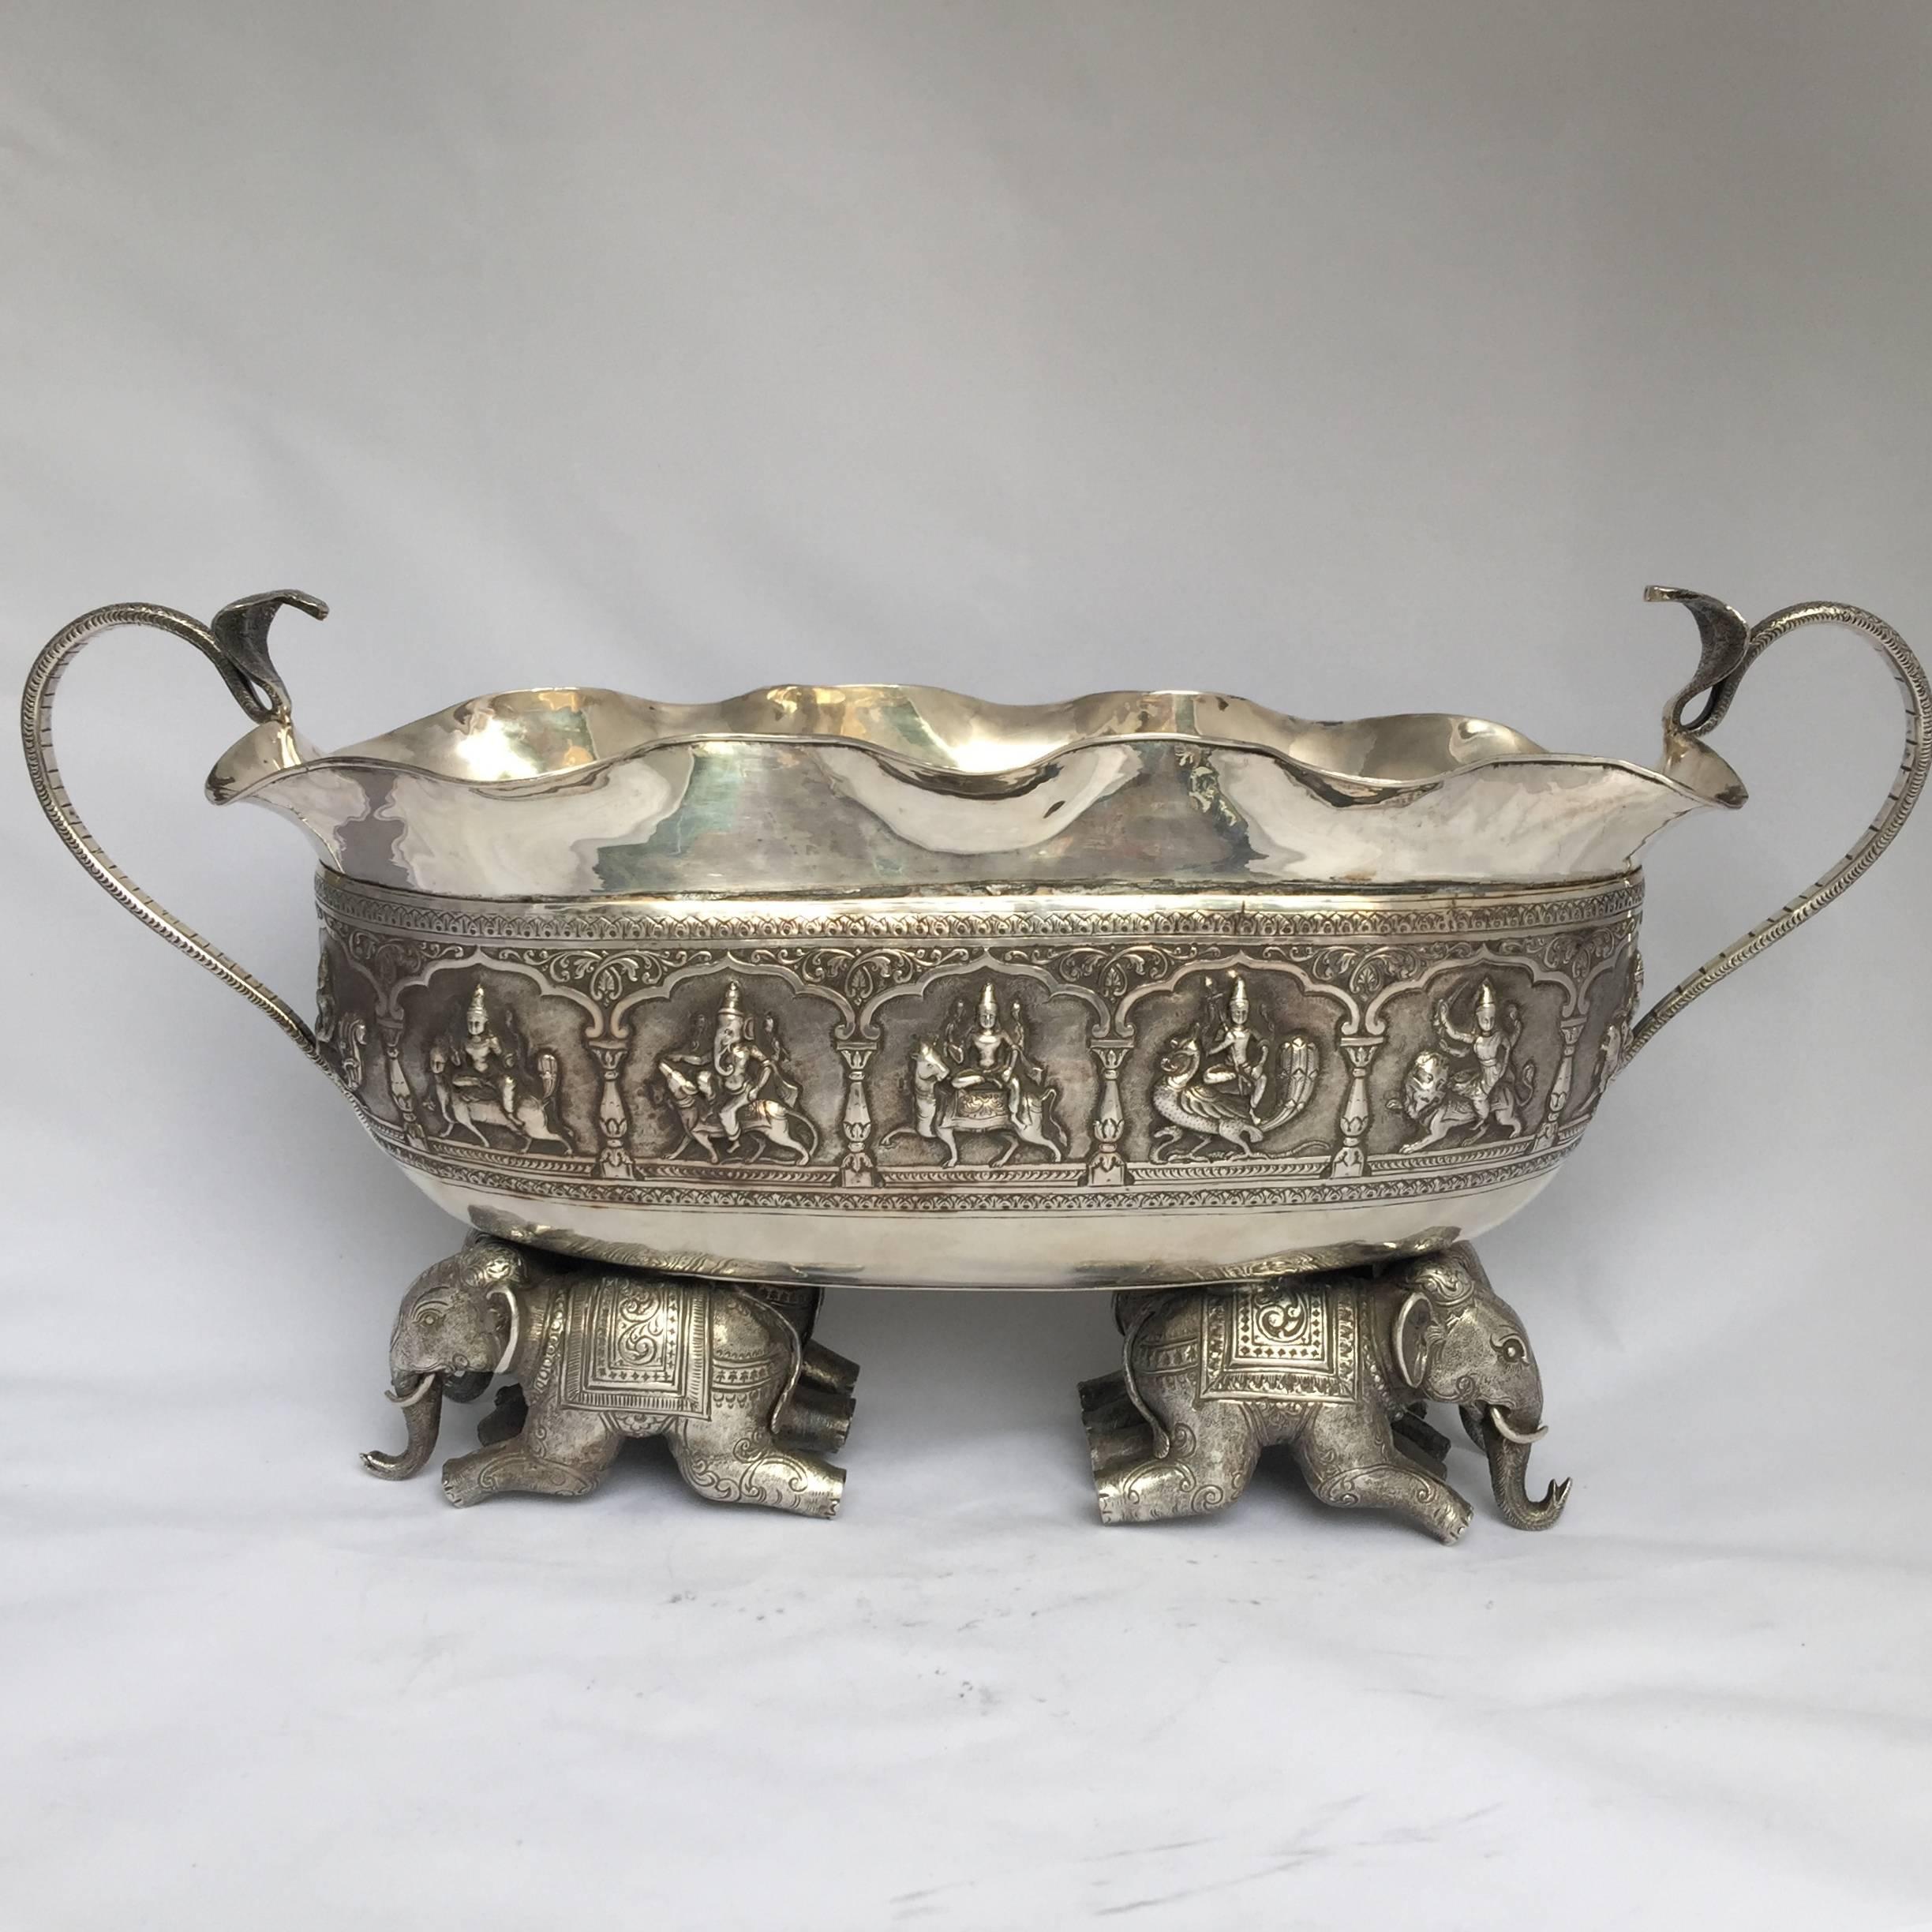 19th Century Indian Sterling Silver Jardiniere, Cast Elephants Form the Base 2